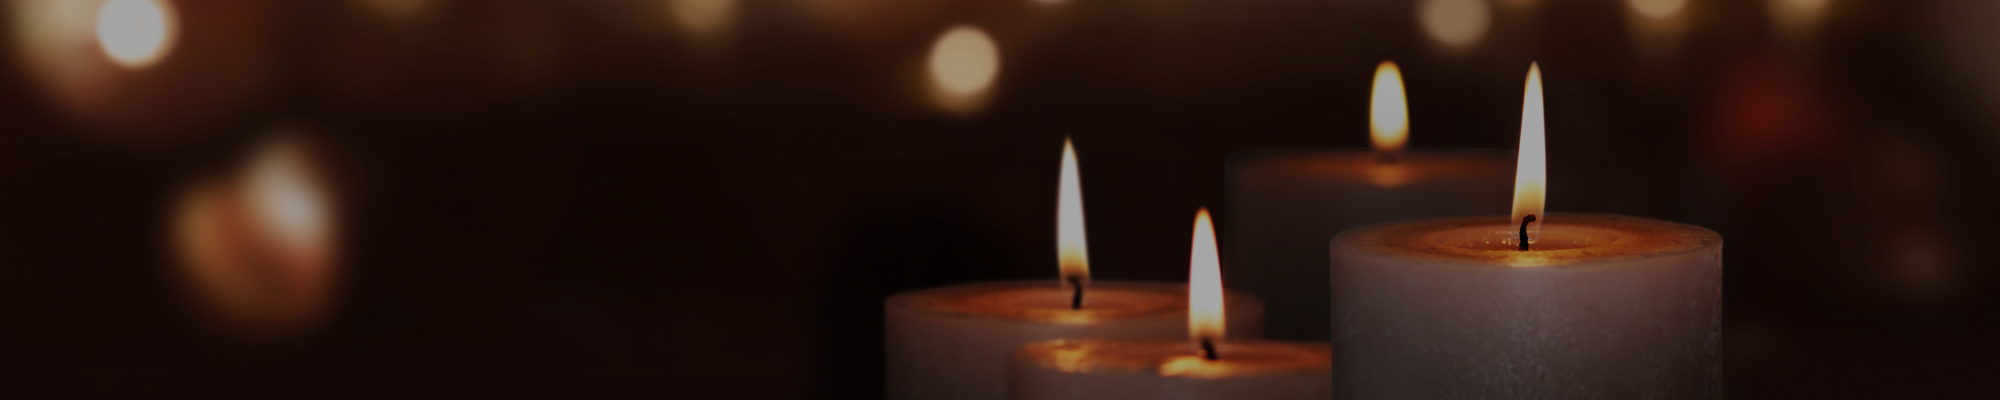 image of four lit candles in the forefront and several blurred lit candles in the background